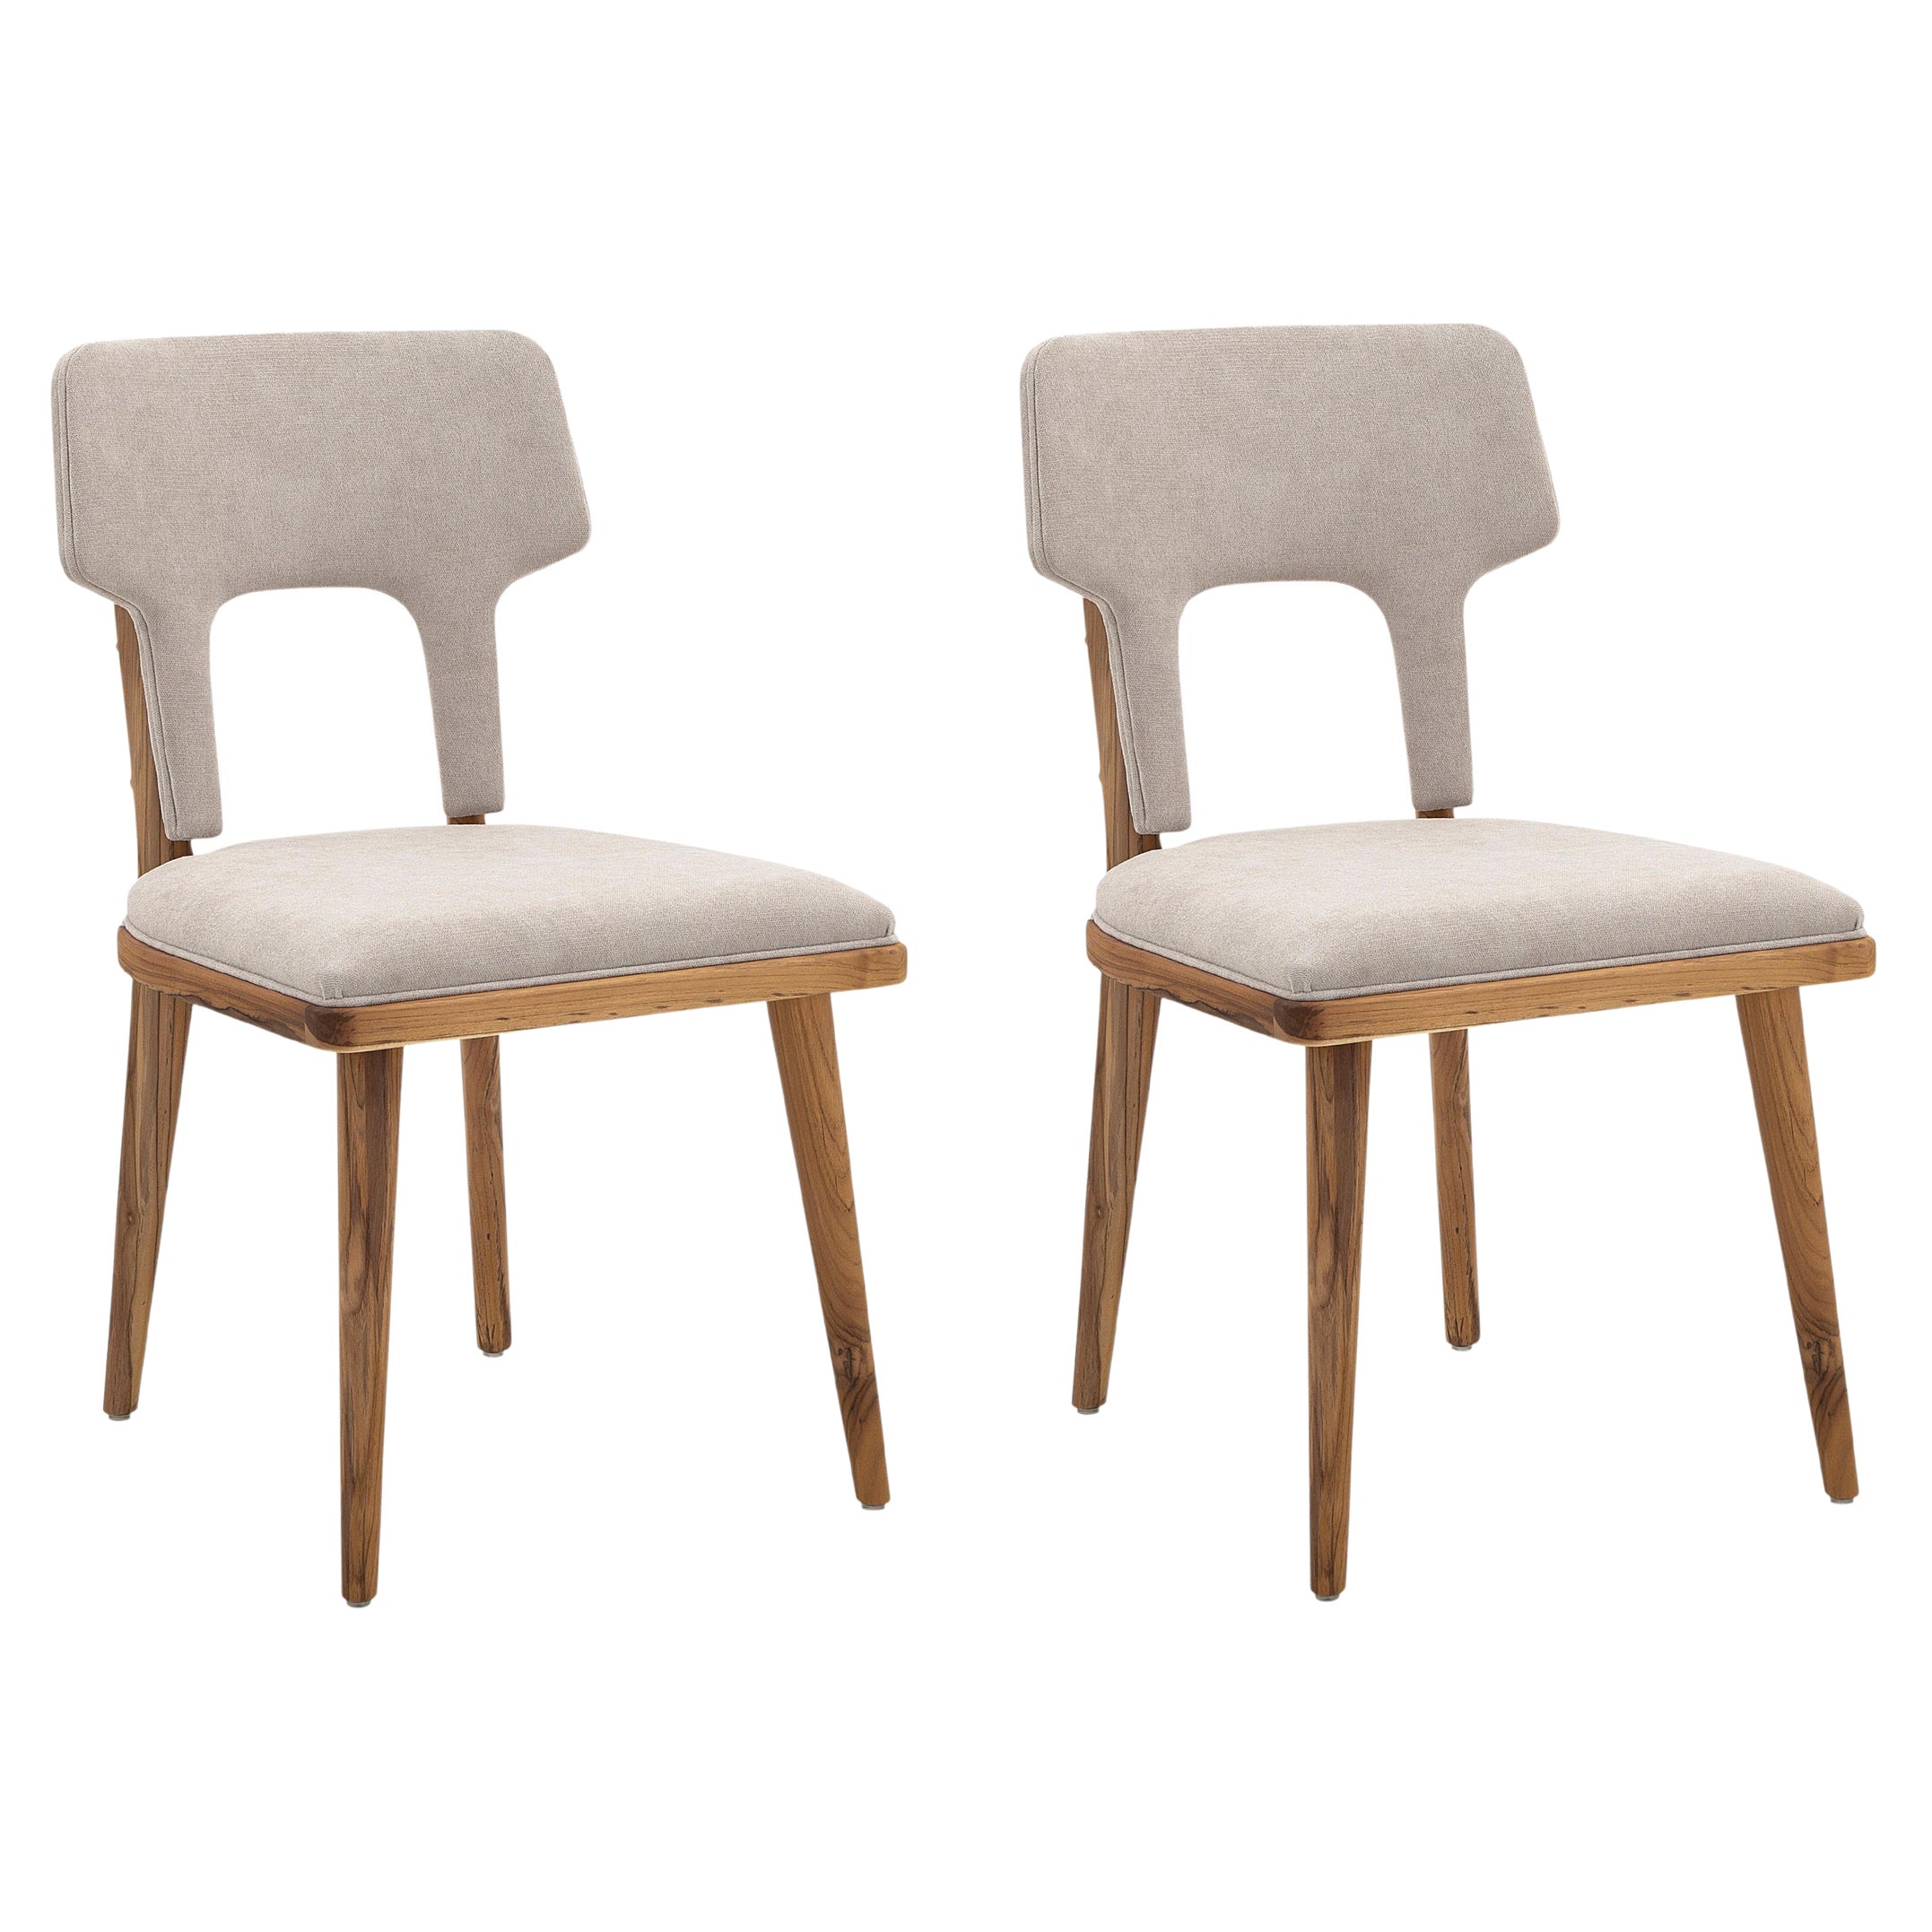 Fork Dining Chair in Light Beige Fabric and Teak Wood Finish, Set of 2 For Sale